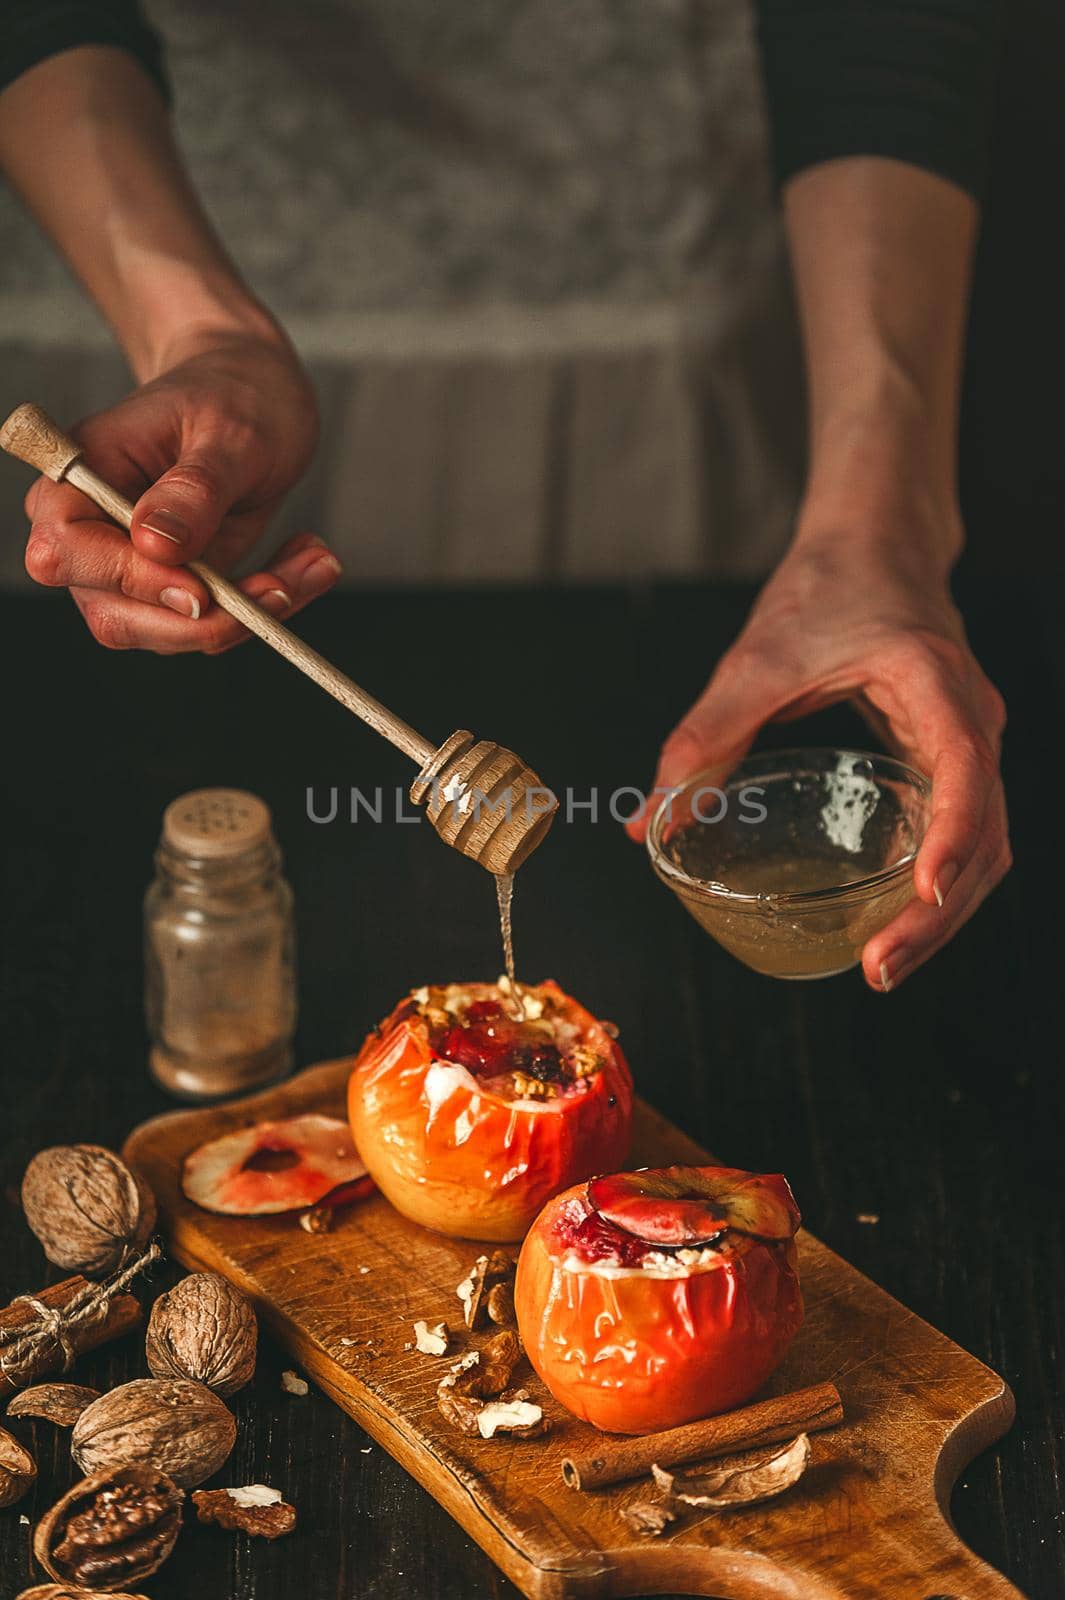 baked apple by vvmich